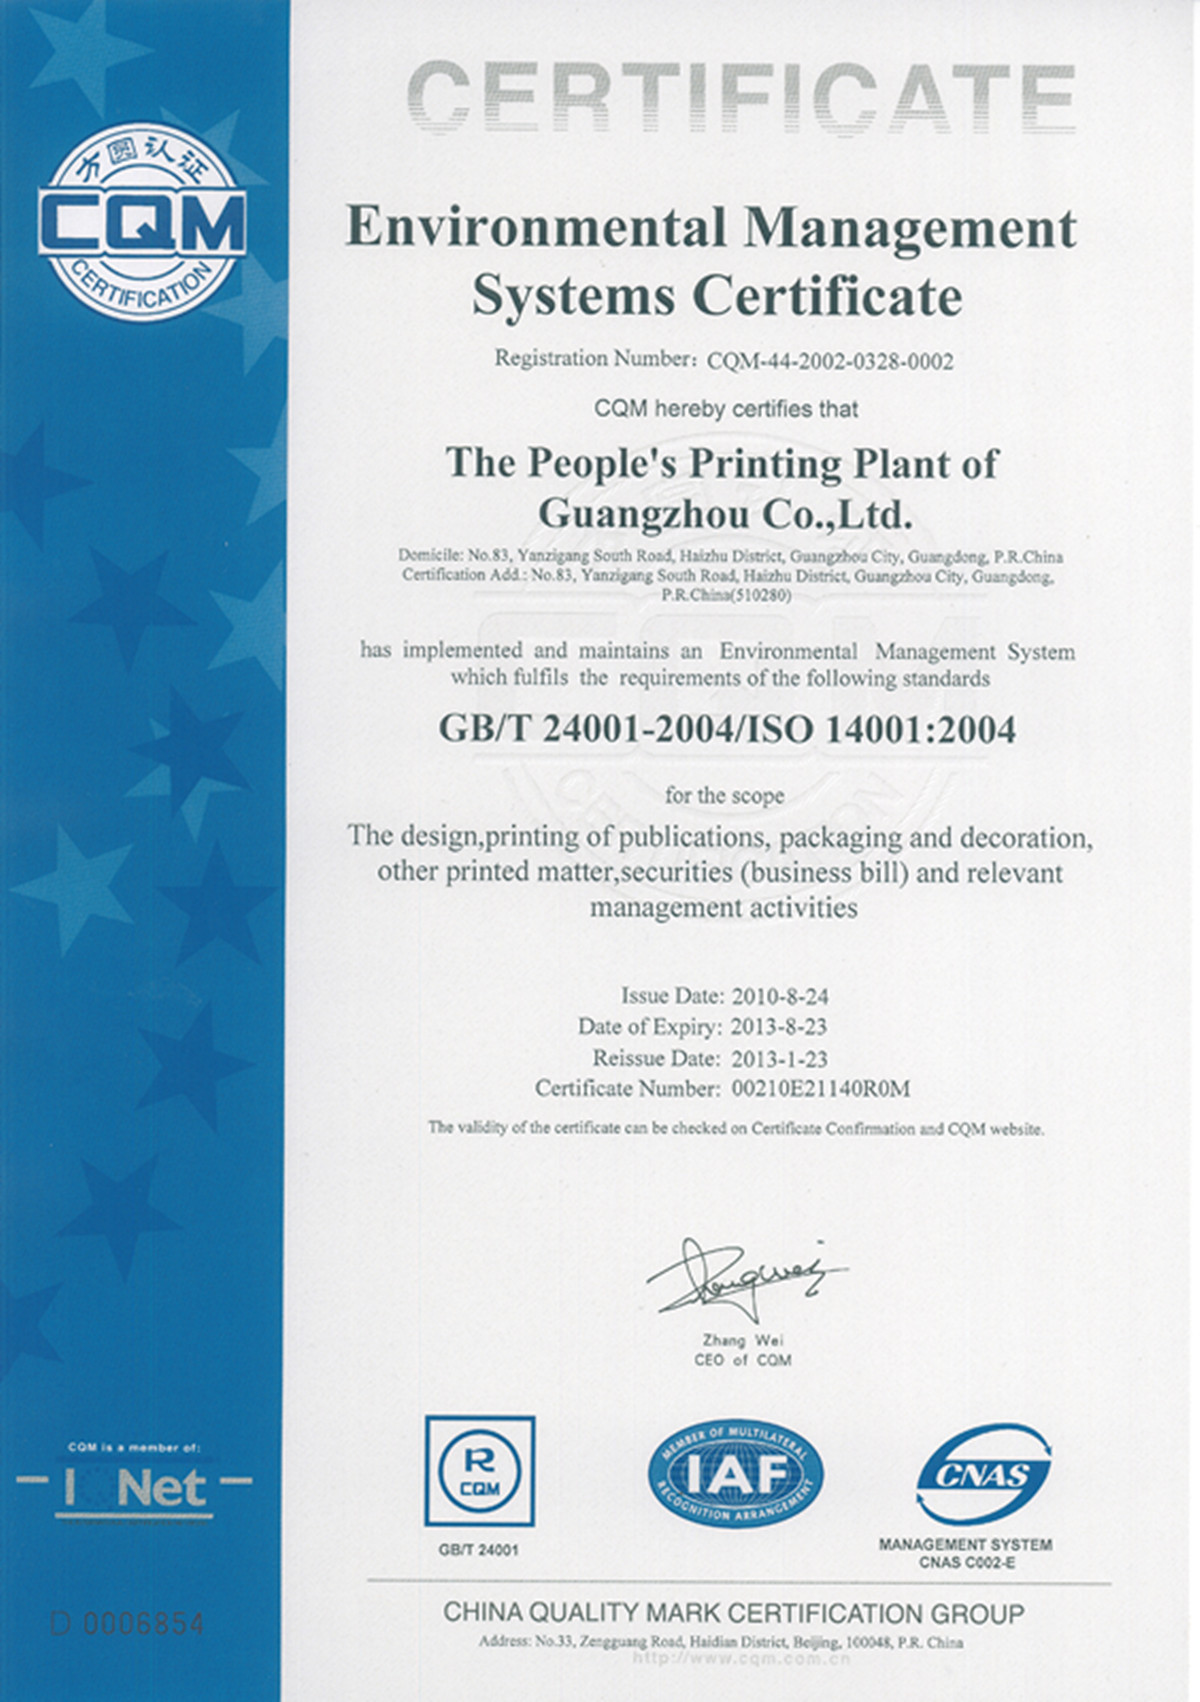 The People's Printing Plant Of Guangzhou Co.,Ltd Certifications